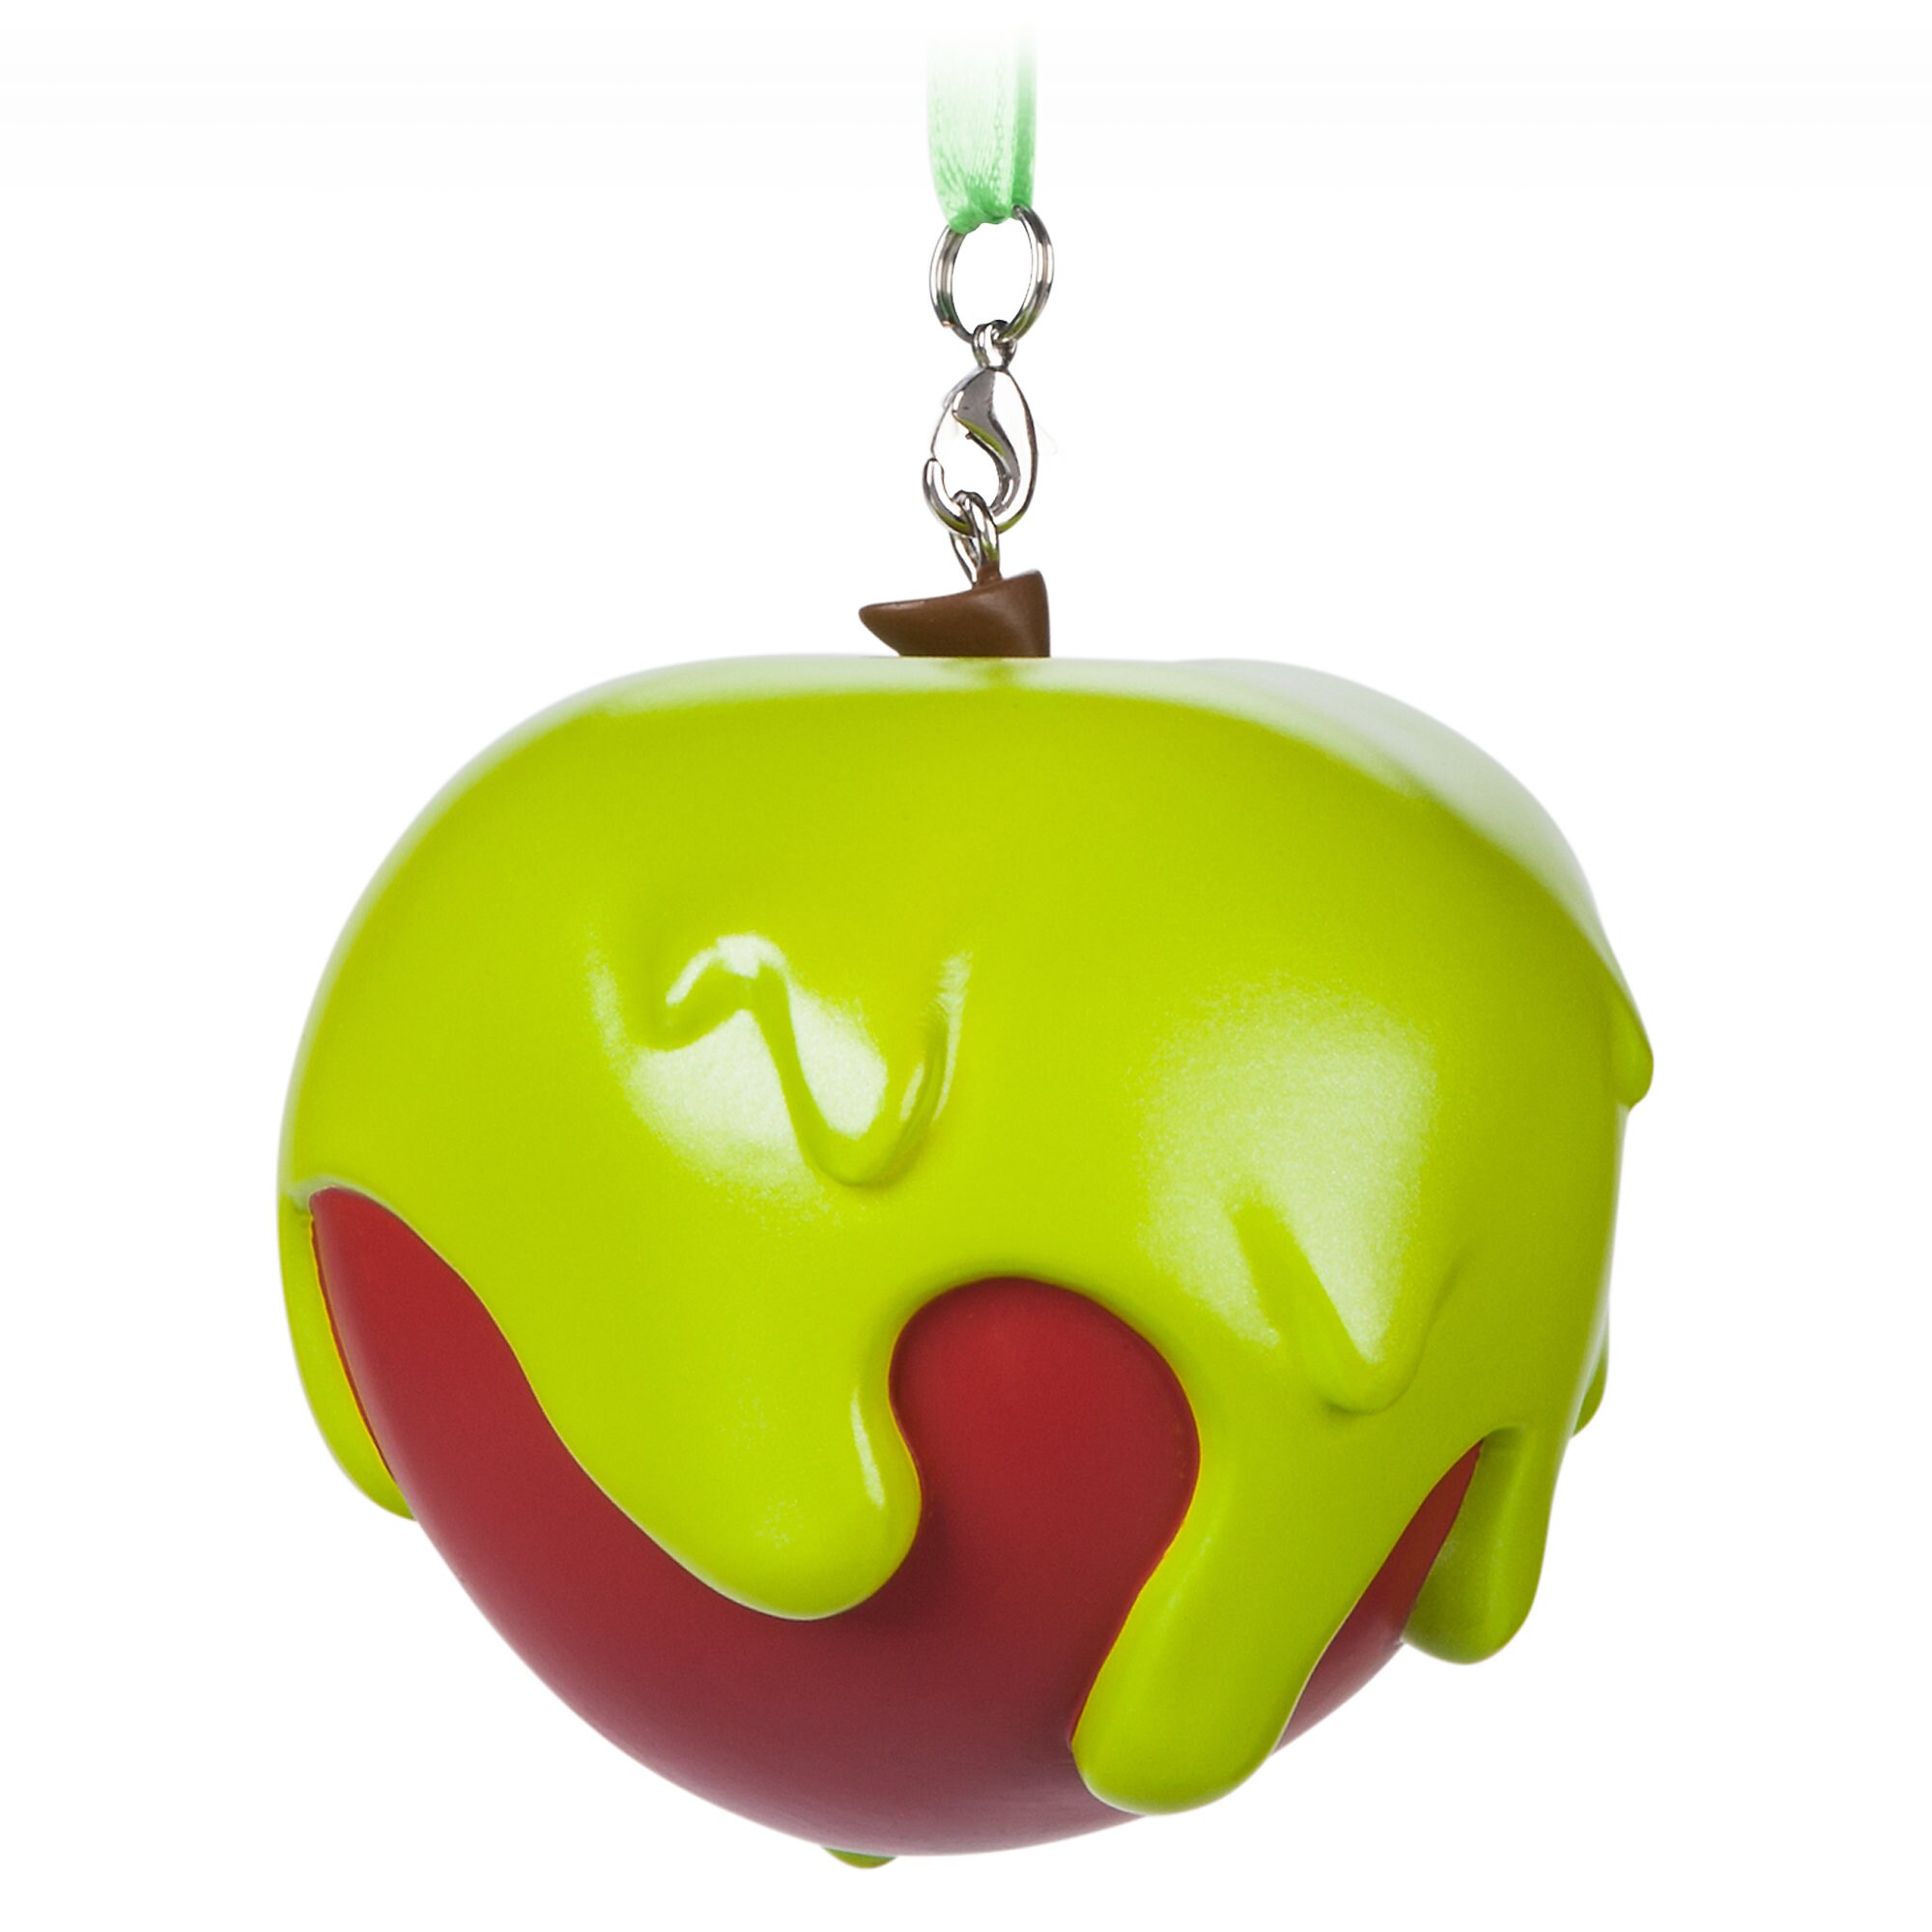 Poisoned Apple Ornament - Snow White and the Seven Dwarfs